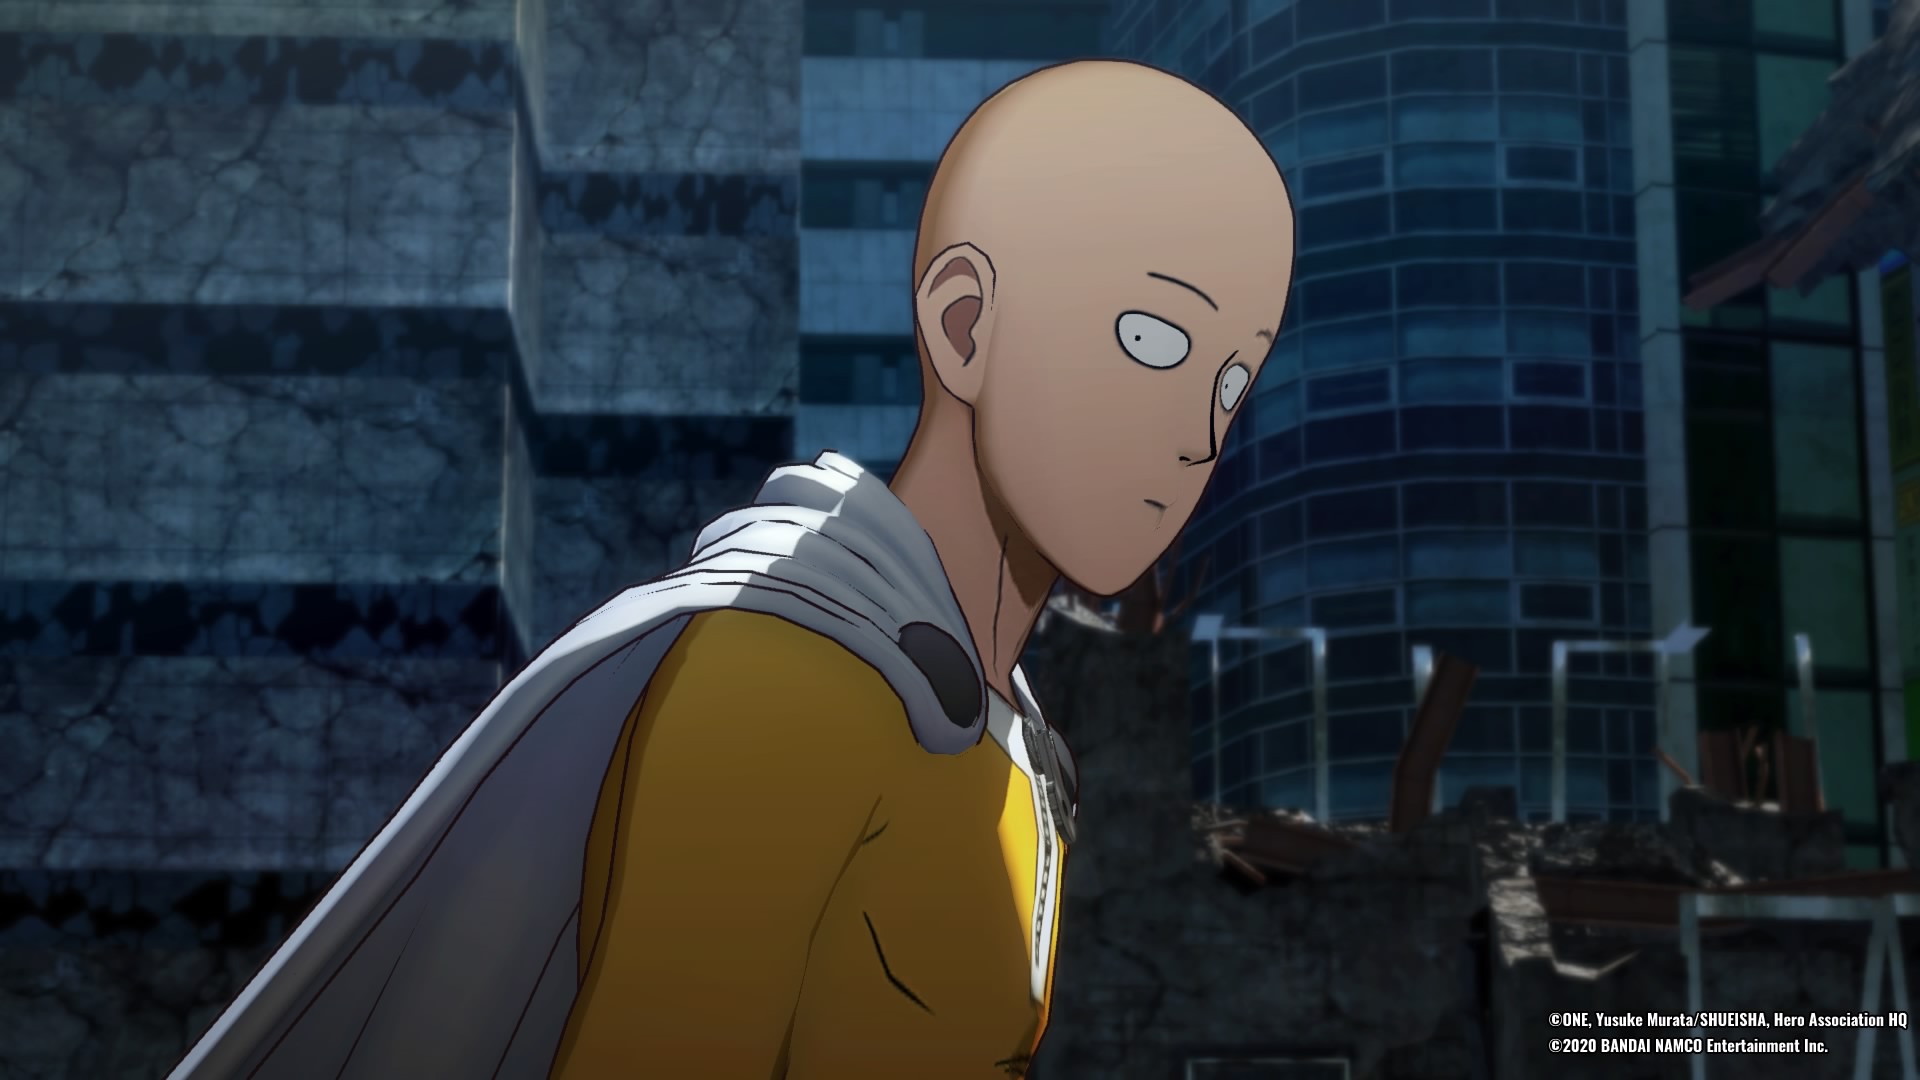 A Live-Action One Punch Man Movie Is in Development